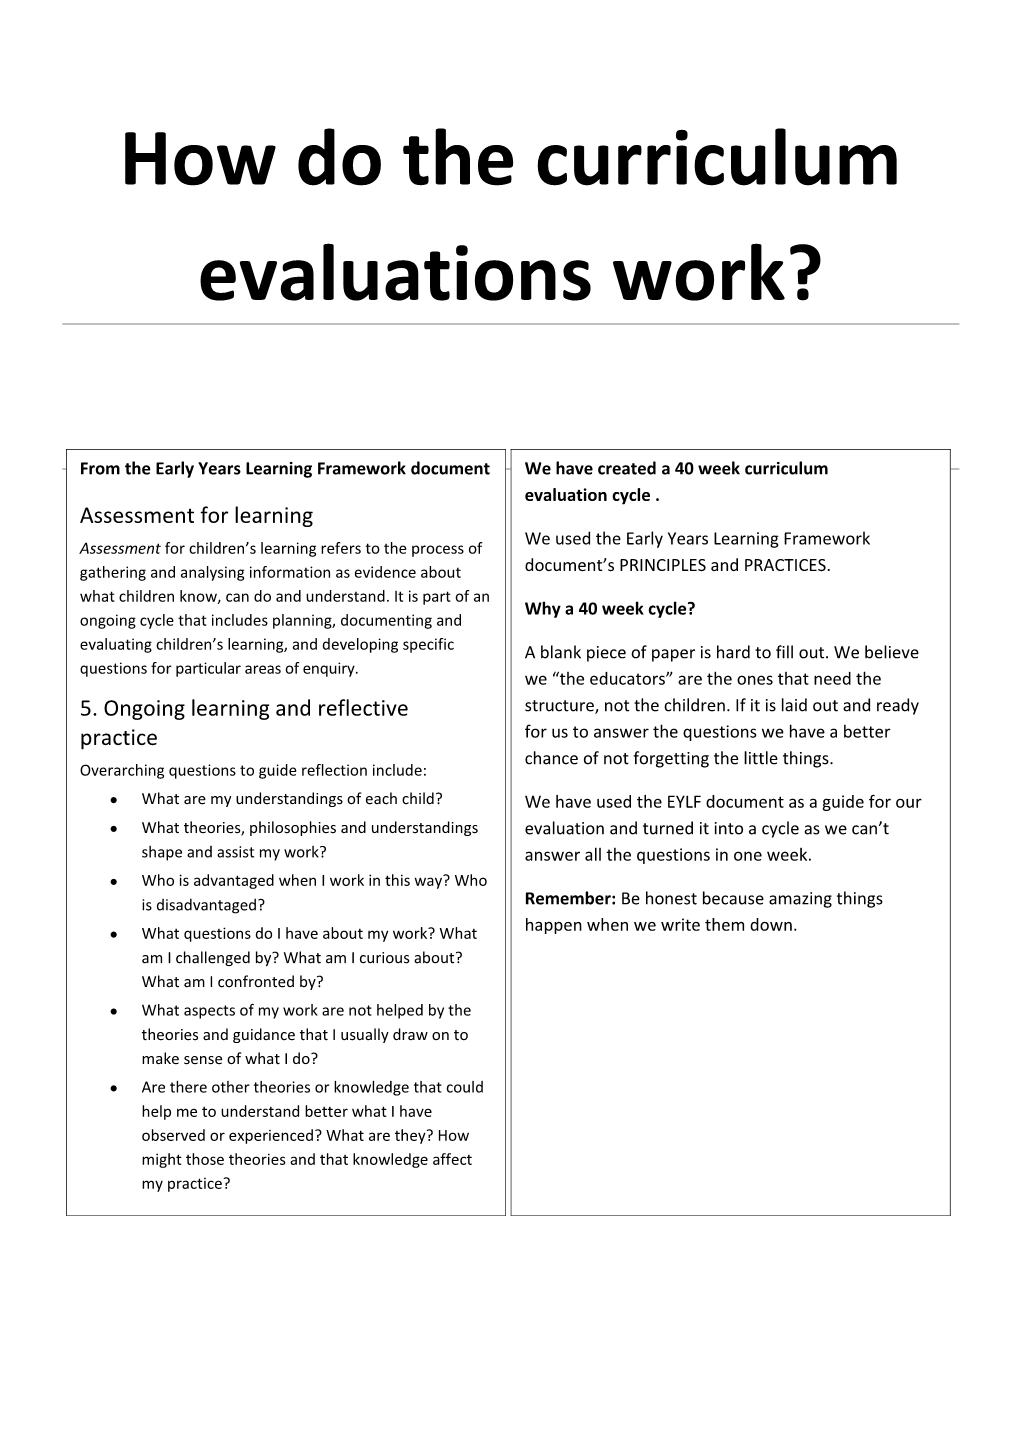 How Do the Curriculum Evaluations Work?